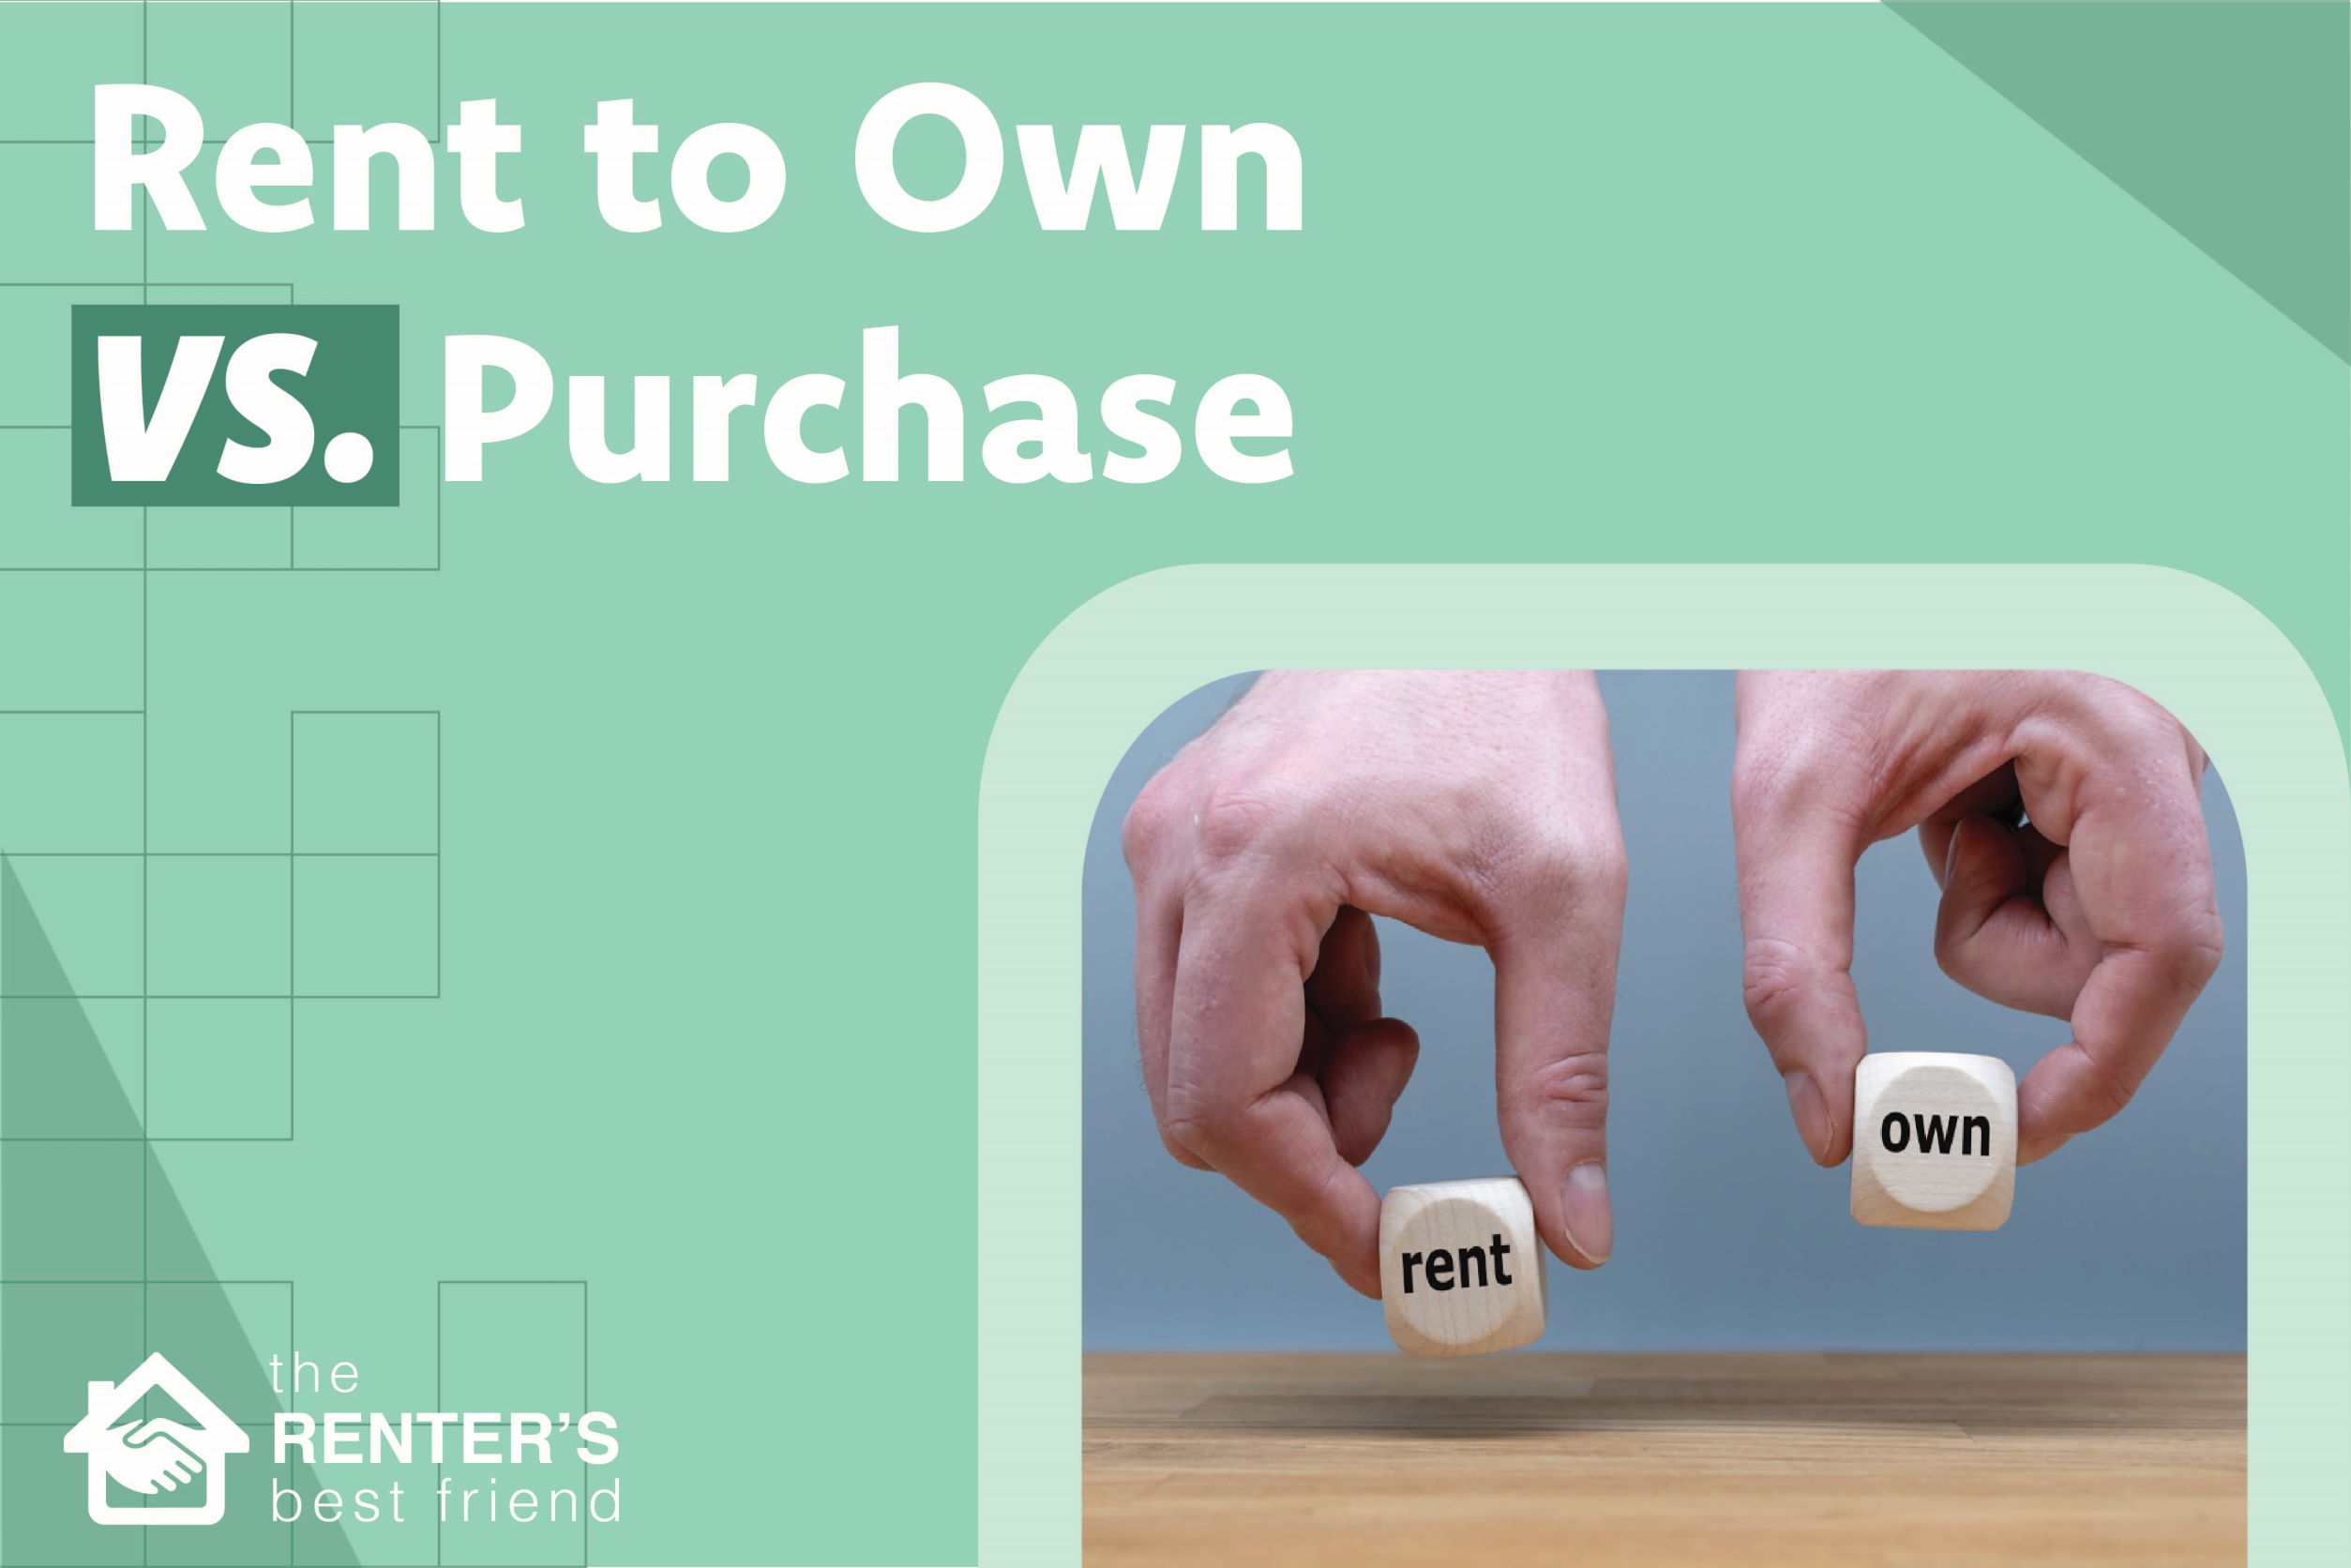 Rent to own homes versus outright purchase